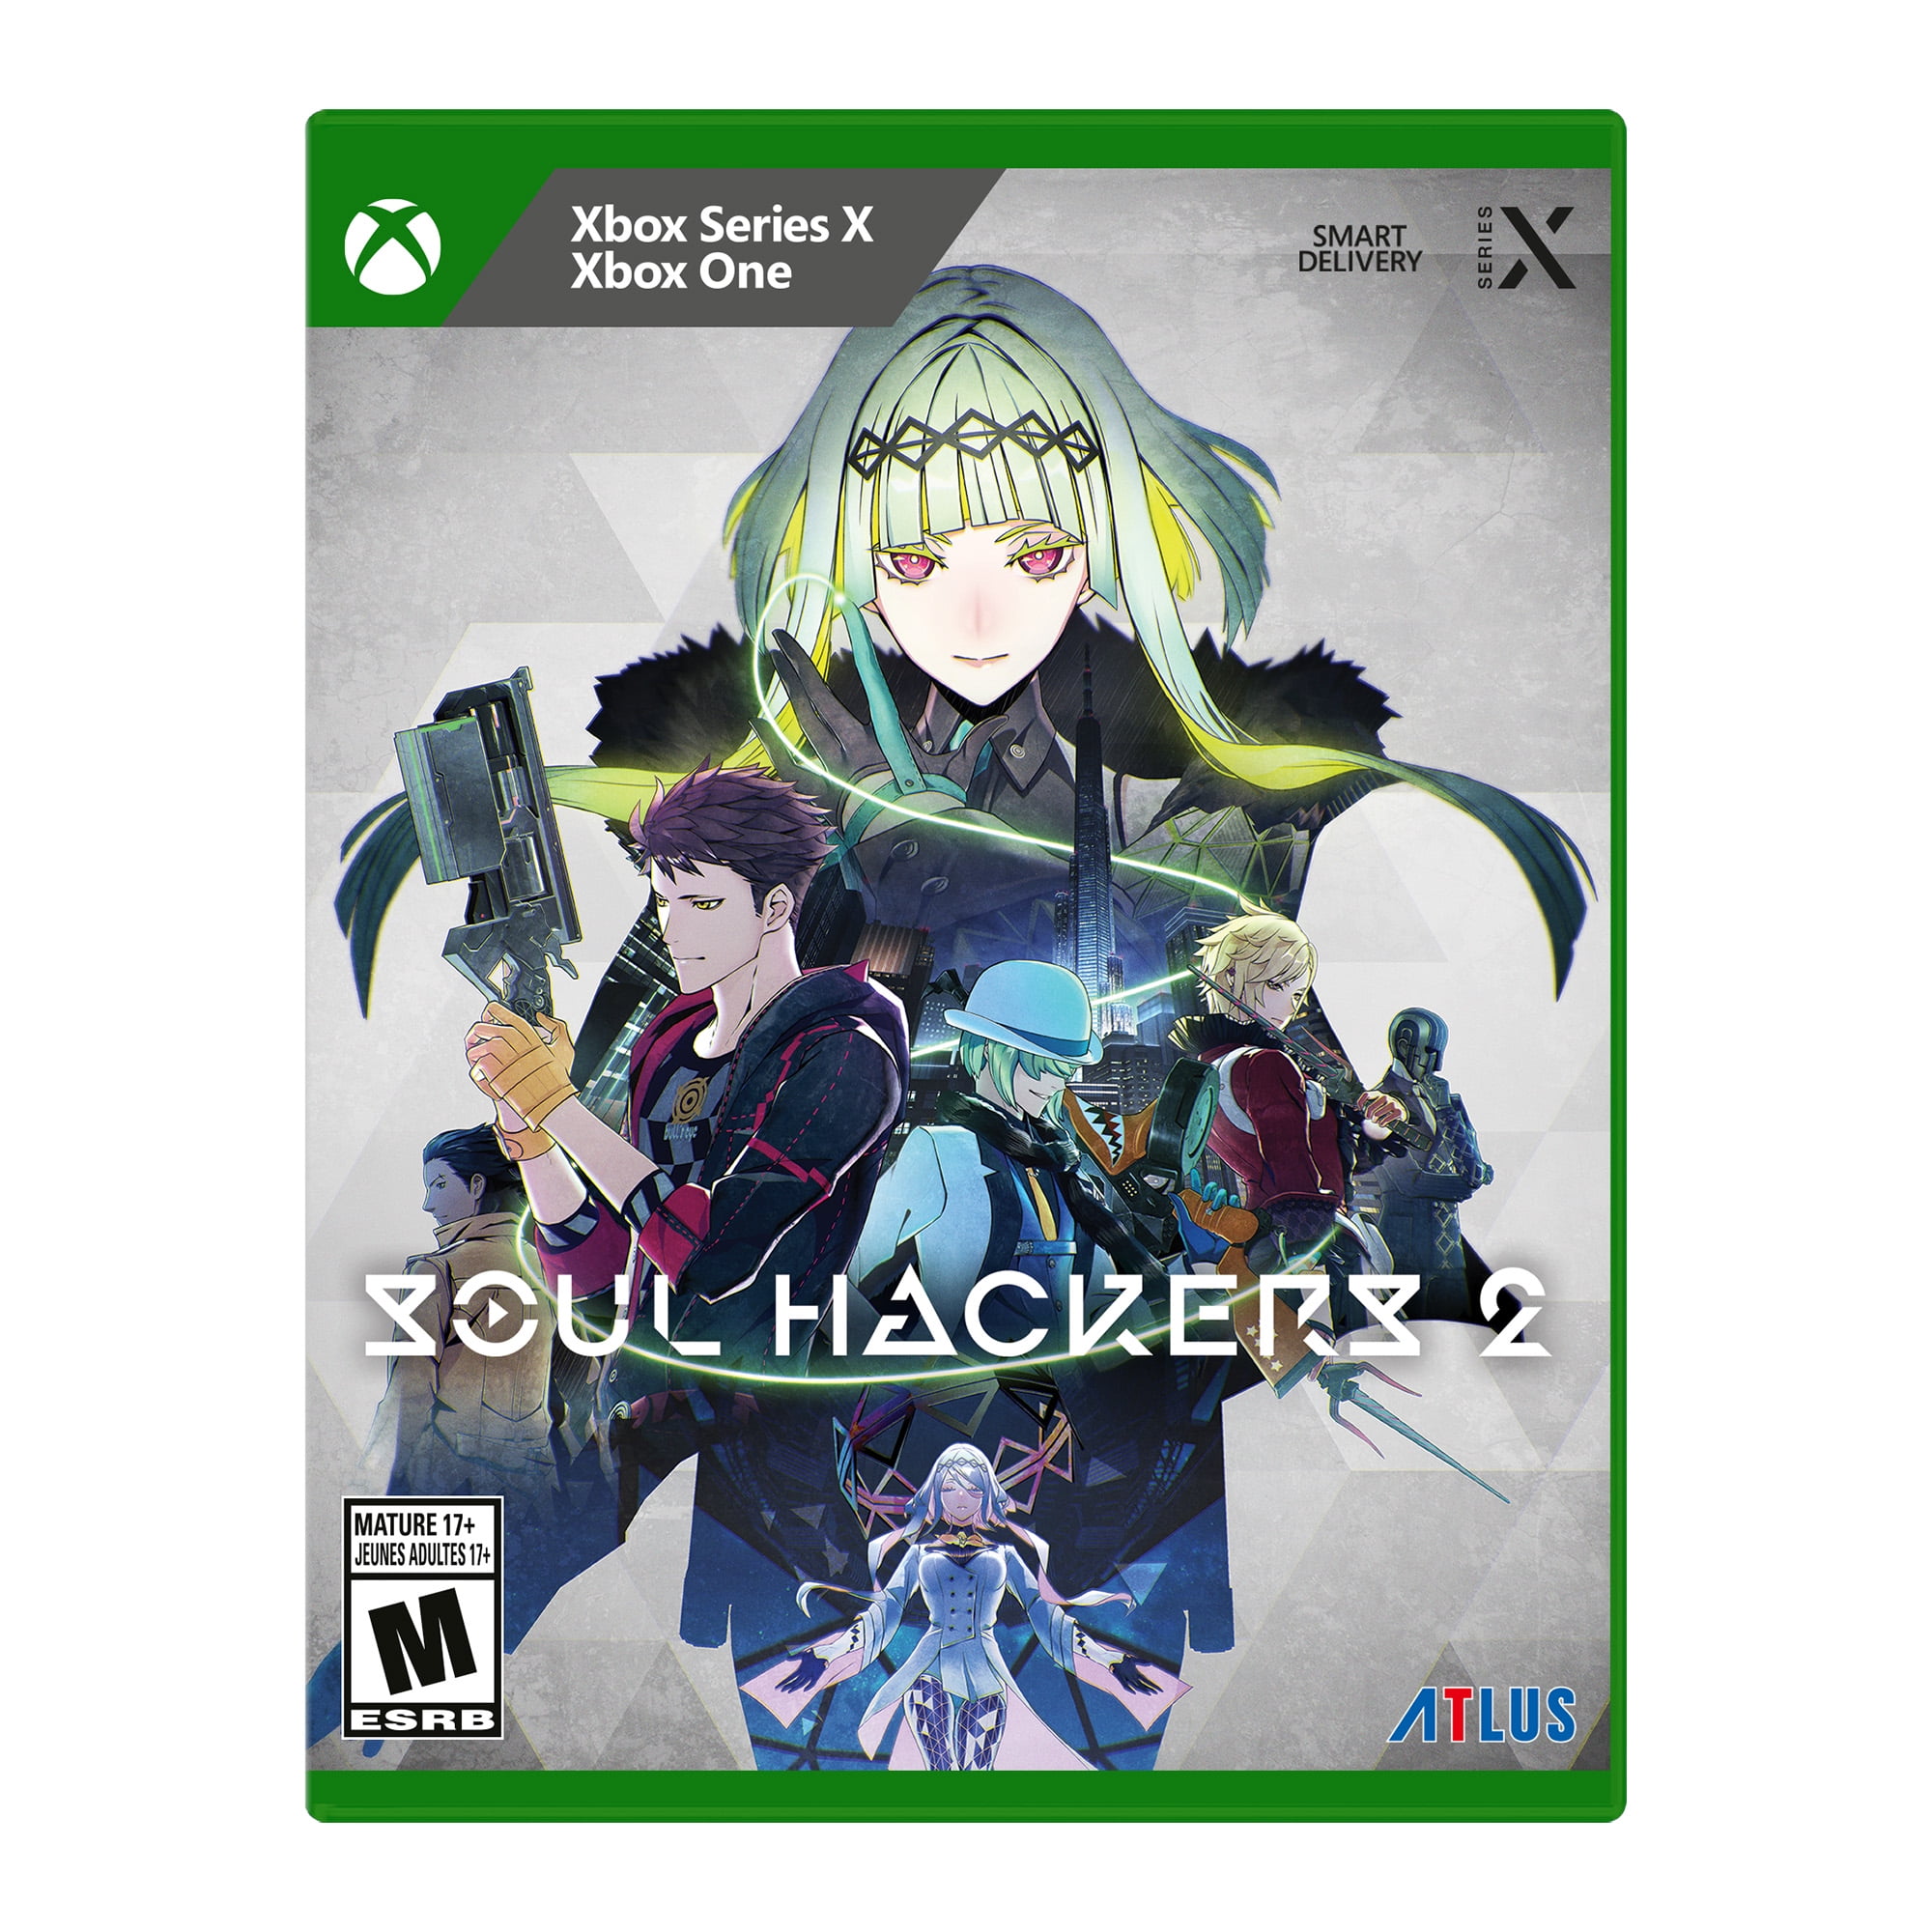 Souls Hackers 2 is Heading to Xbox Game Pass on February 28th